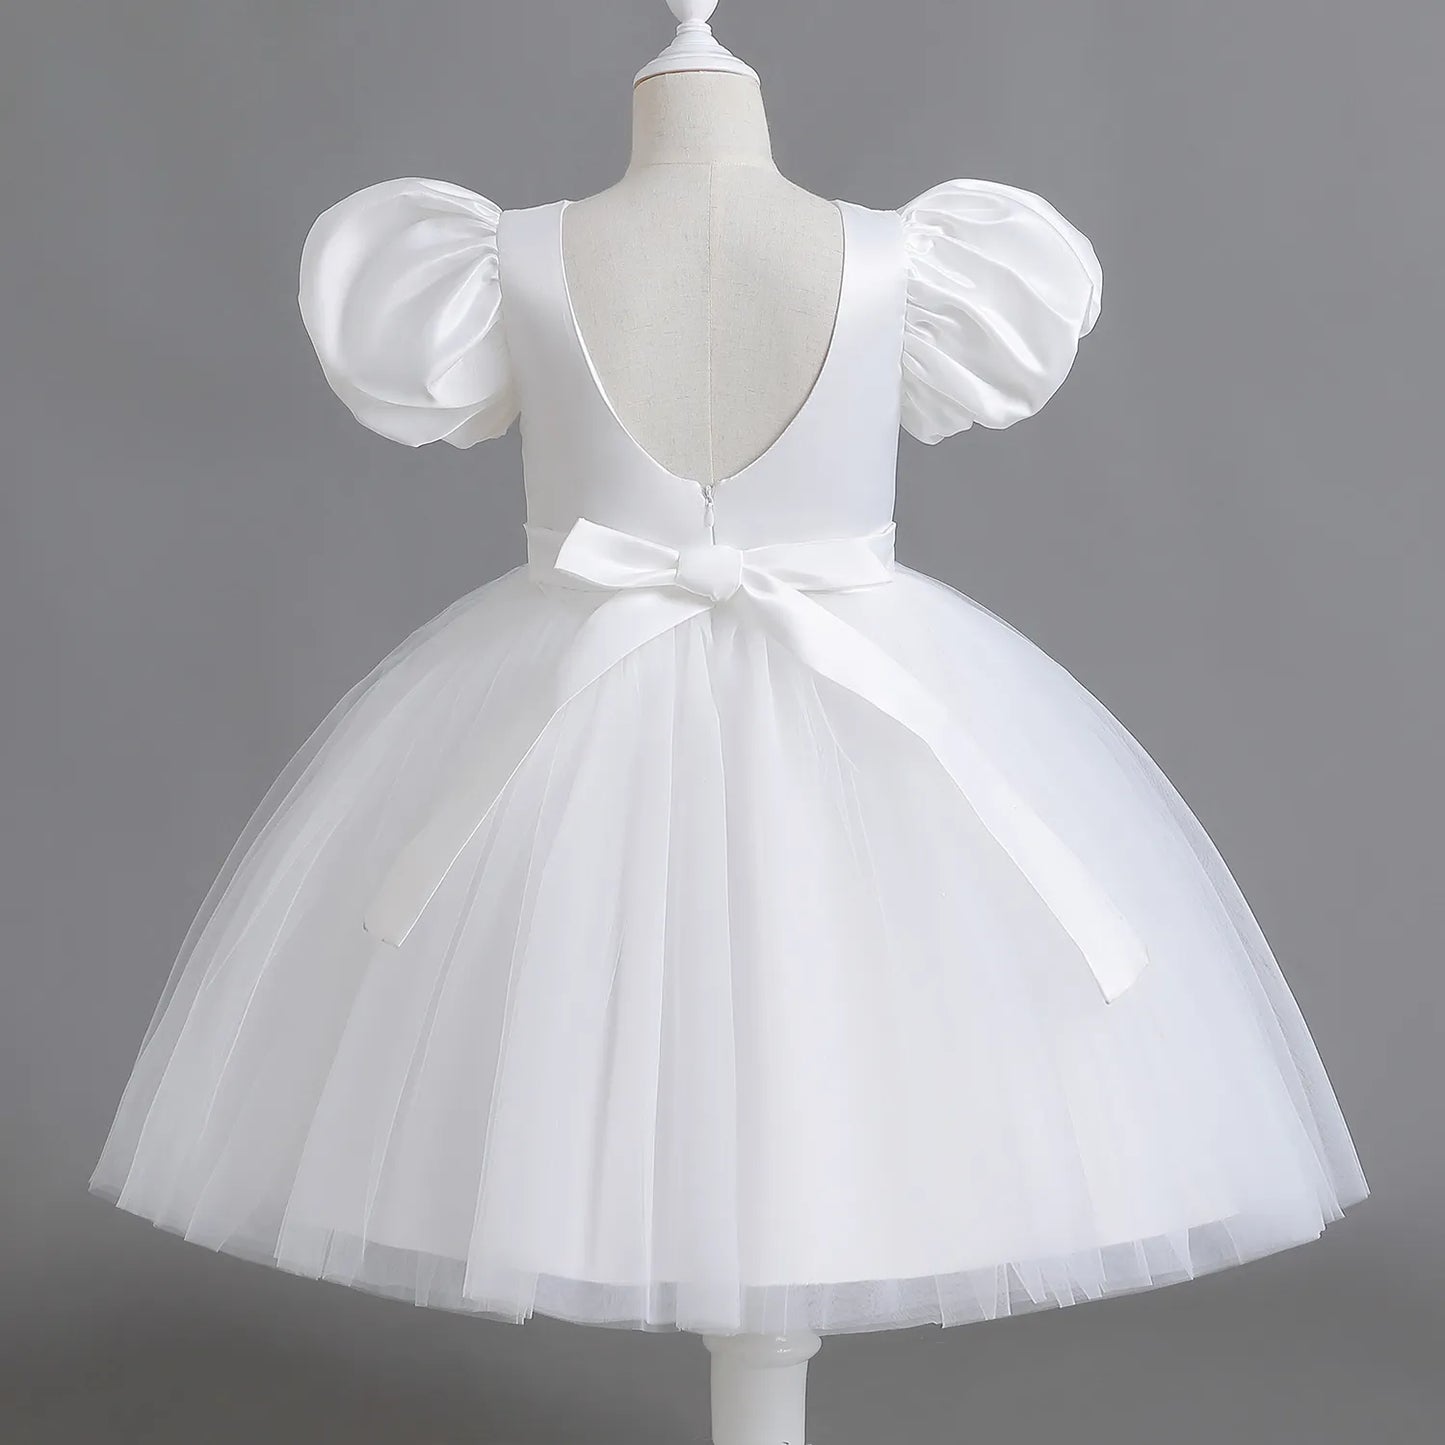 Introducing the "Timeless Elegance" Flower Girl Dress in White – a captivating blend of sophistication and playfulness. With puff sleeves, a U-shaped open back, and a large bow, this dress creates a magical silhouette. The silk-like top ensures comfort, while the very puffy tulle skirt adds a whimsical touch. Perfect for capturing cherished moments on your special day. Make dreams come true – order now for an enchanting celebration!